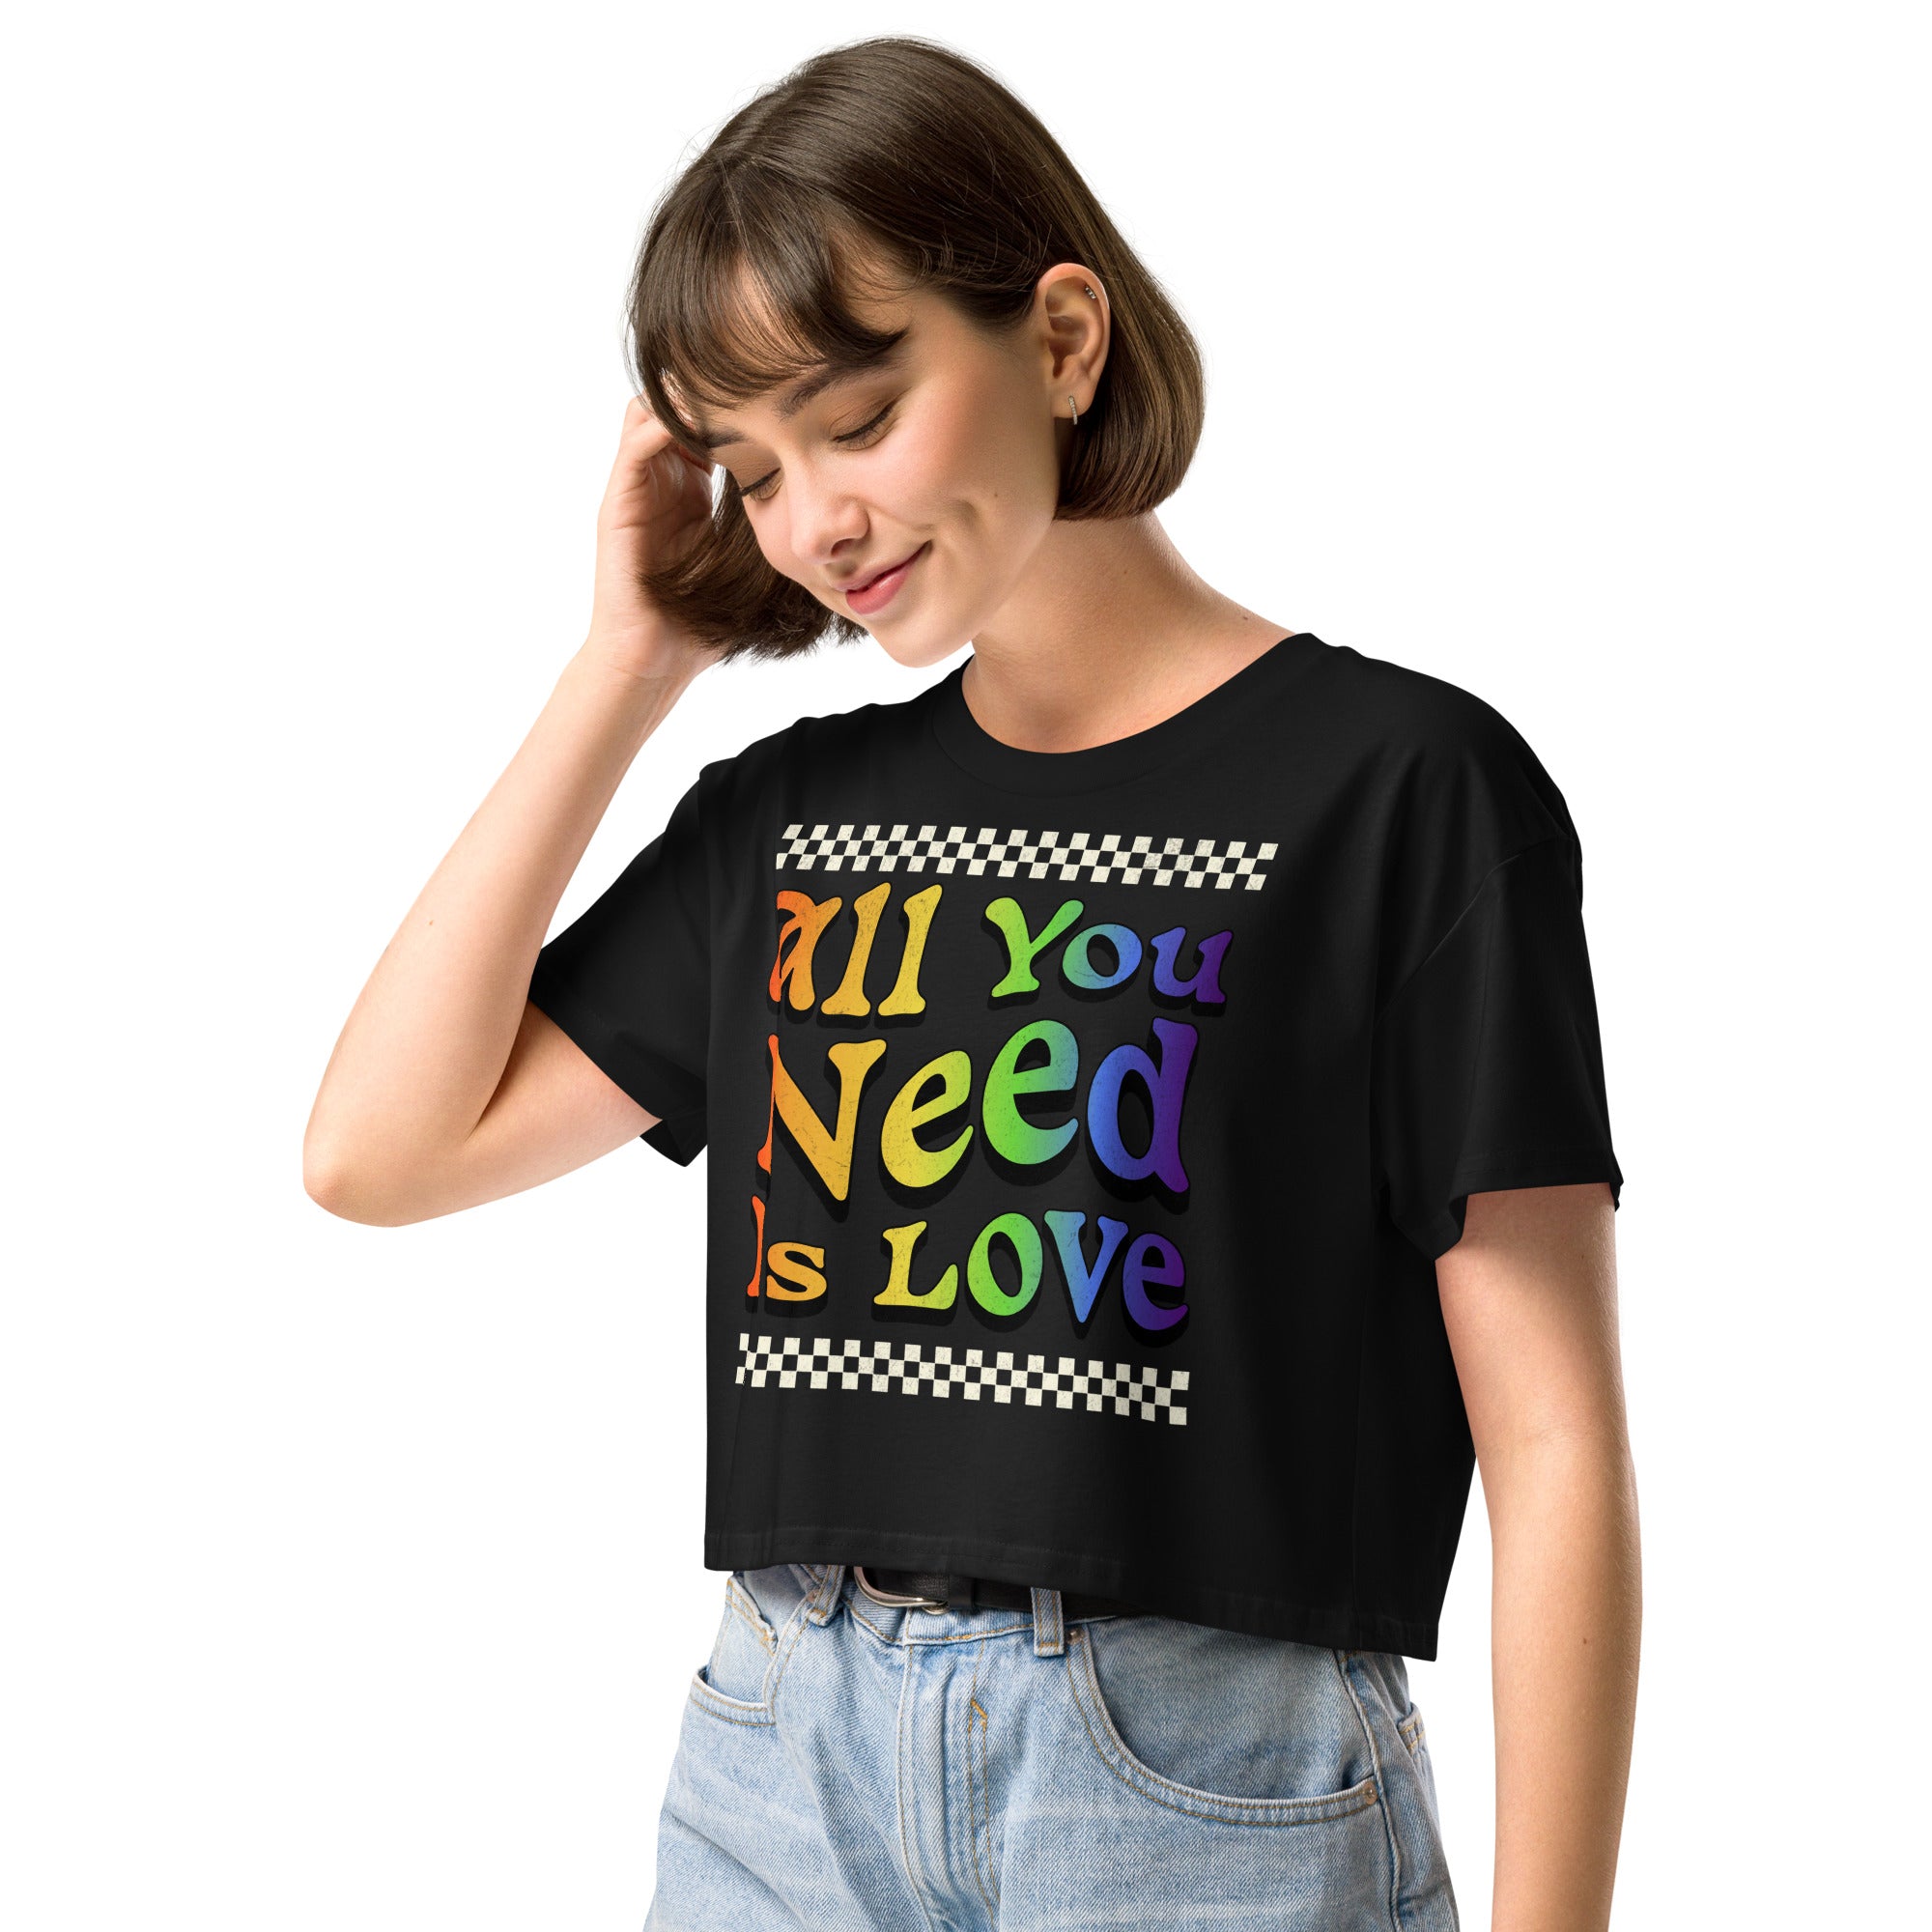 LGBT_Pride-All You Need Is Love Crop top - Rose Gold Co. Shop